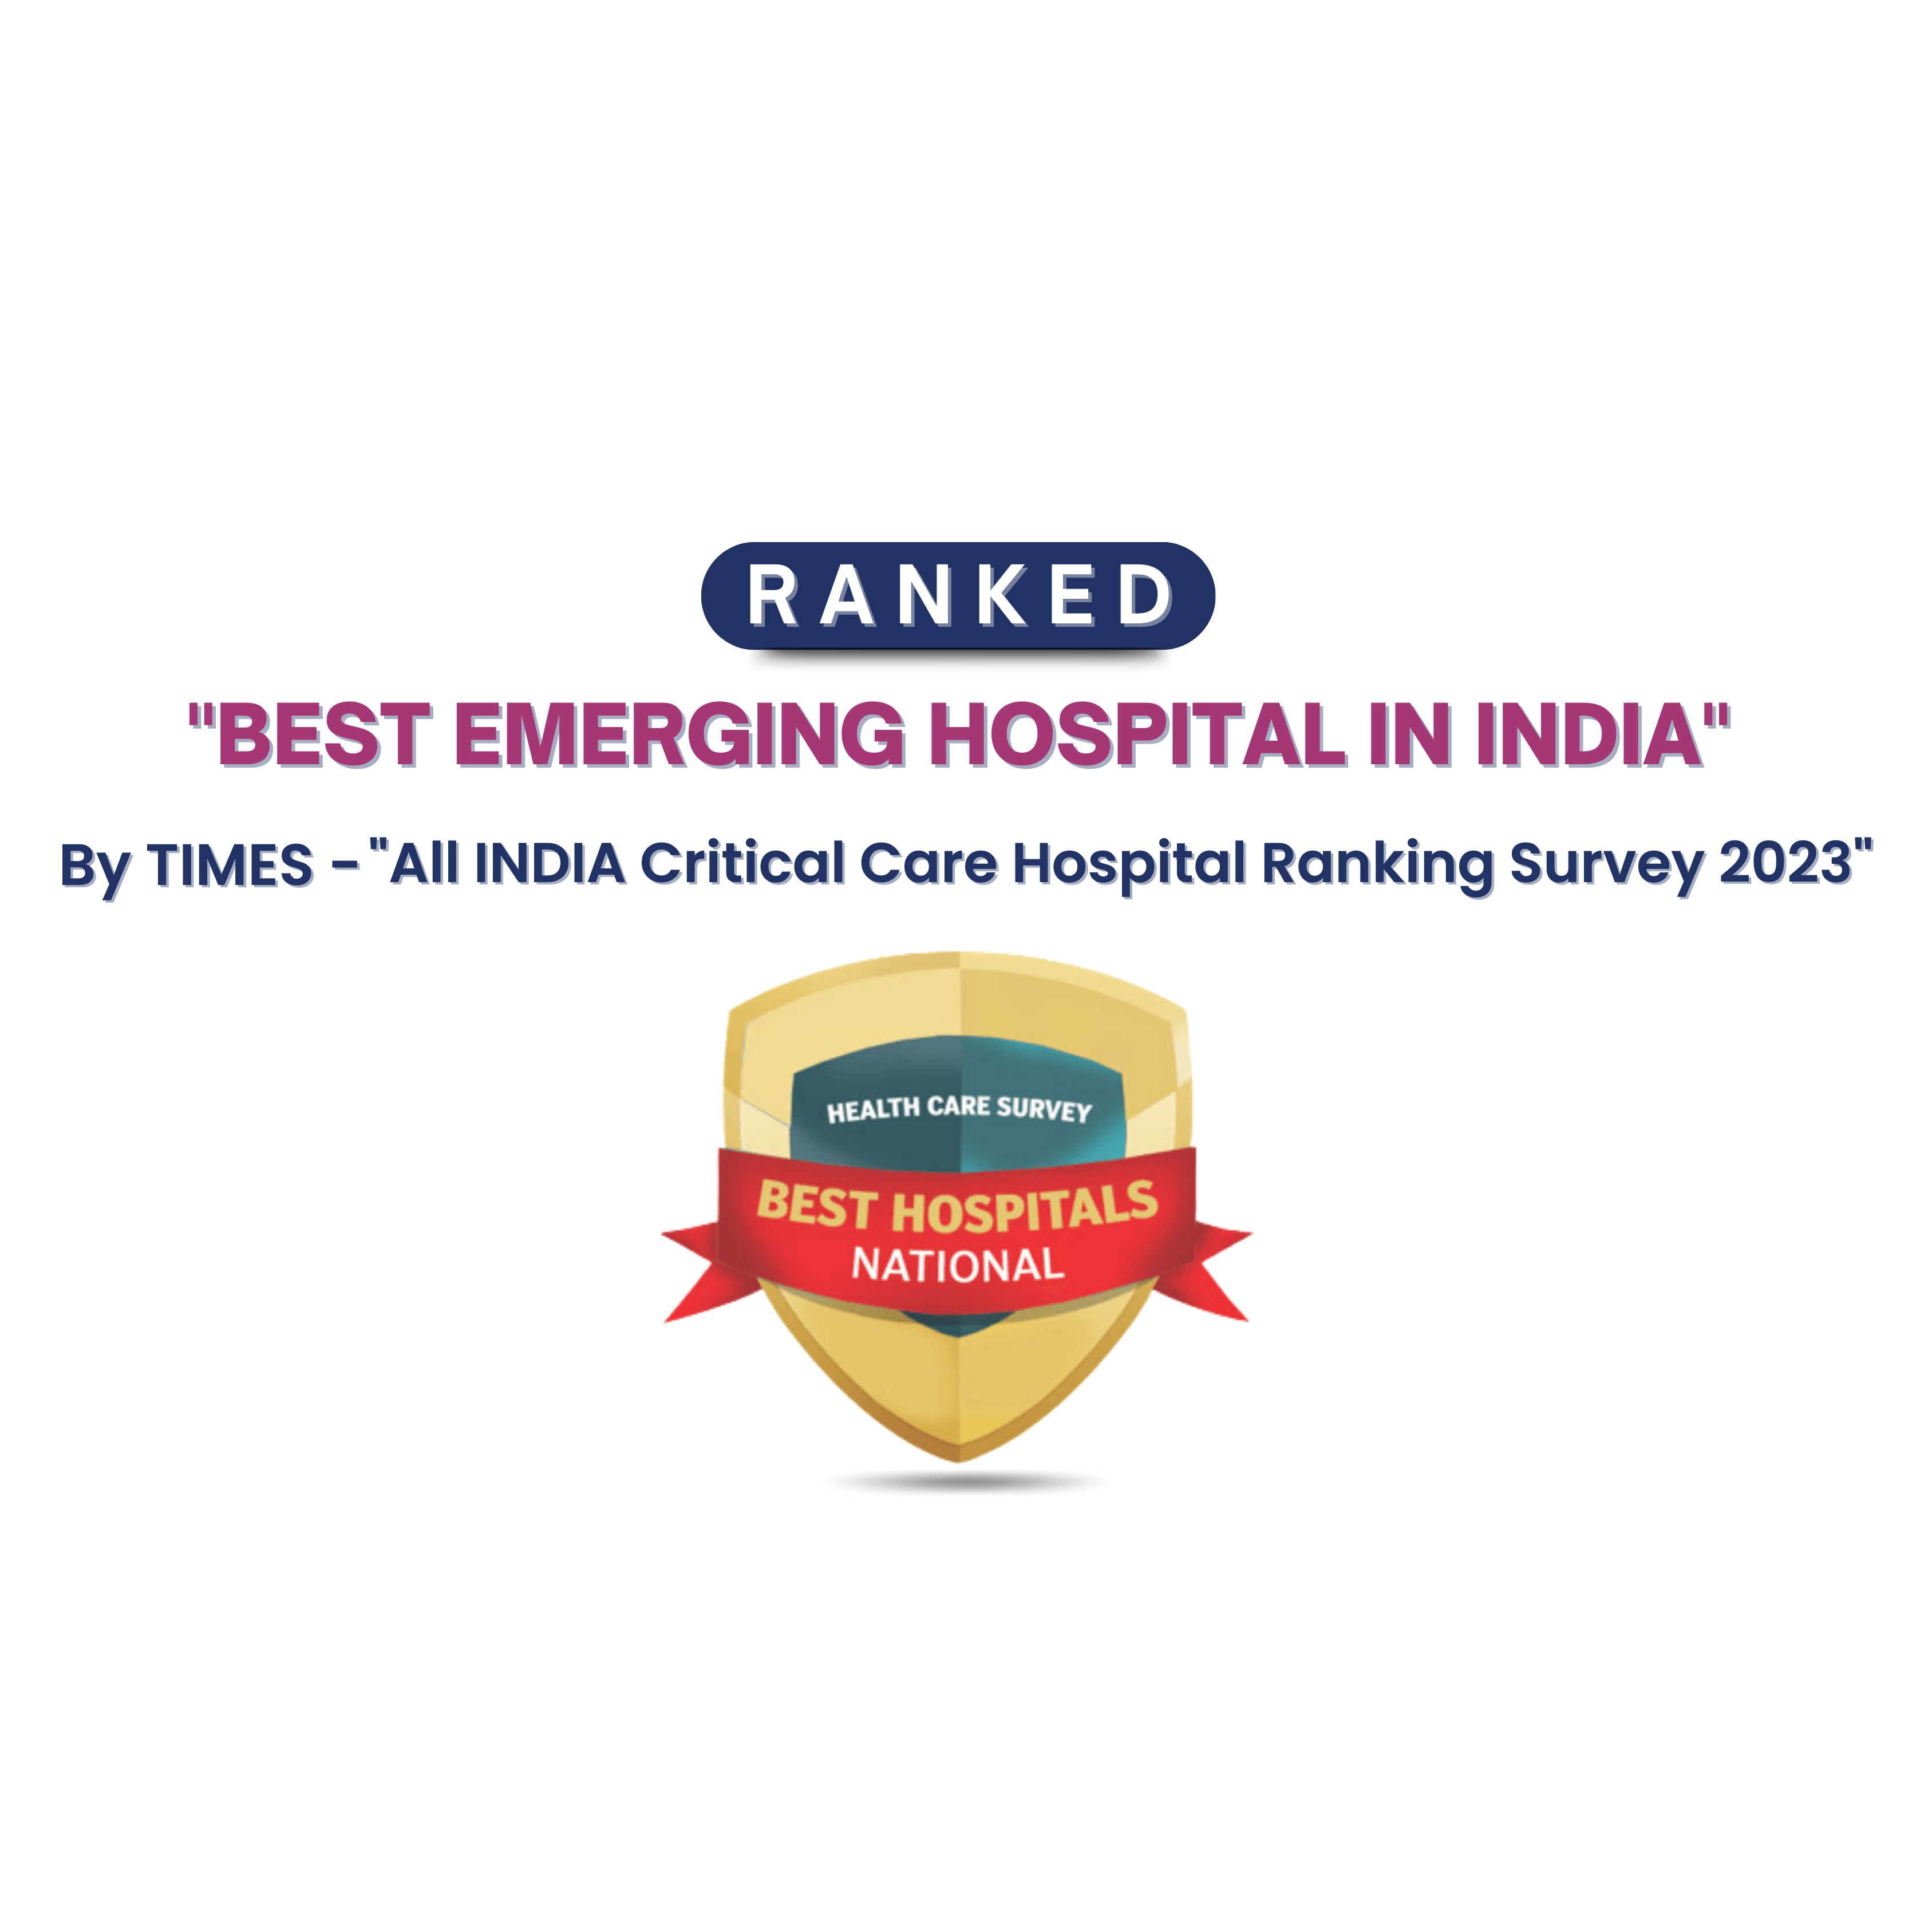 A modern wellness hospital in India, recognized as the best emerging hospital of 2023